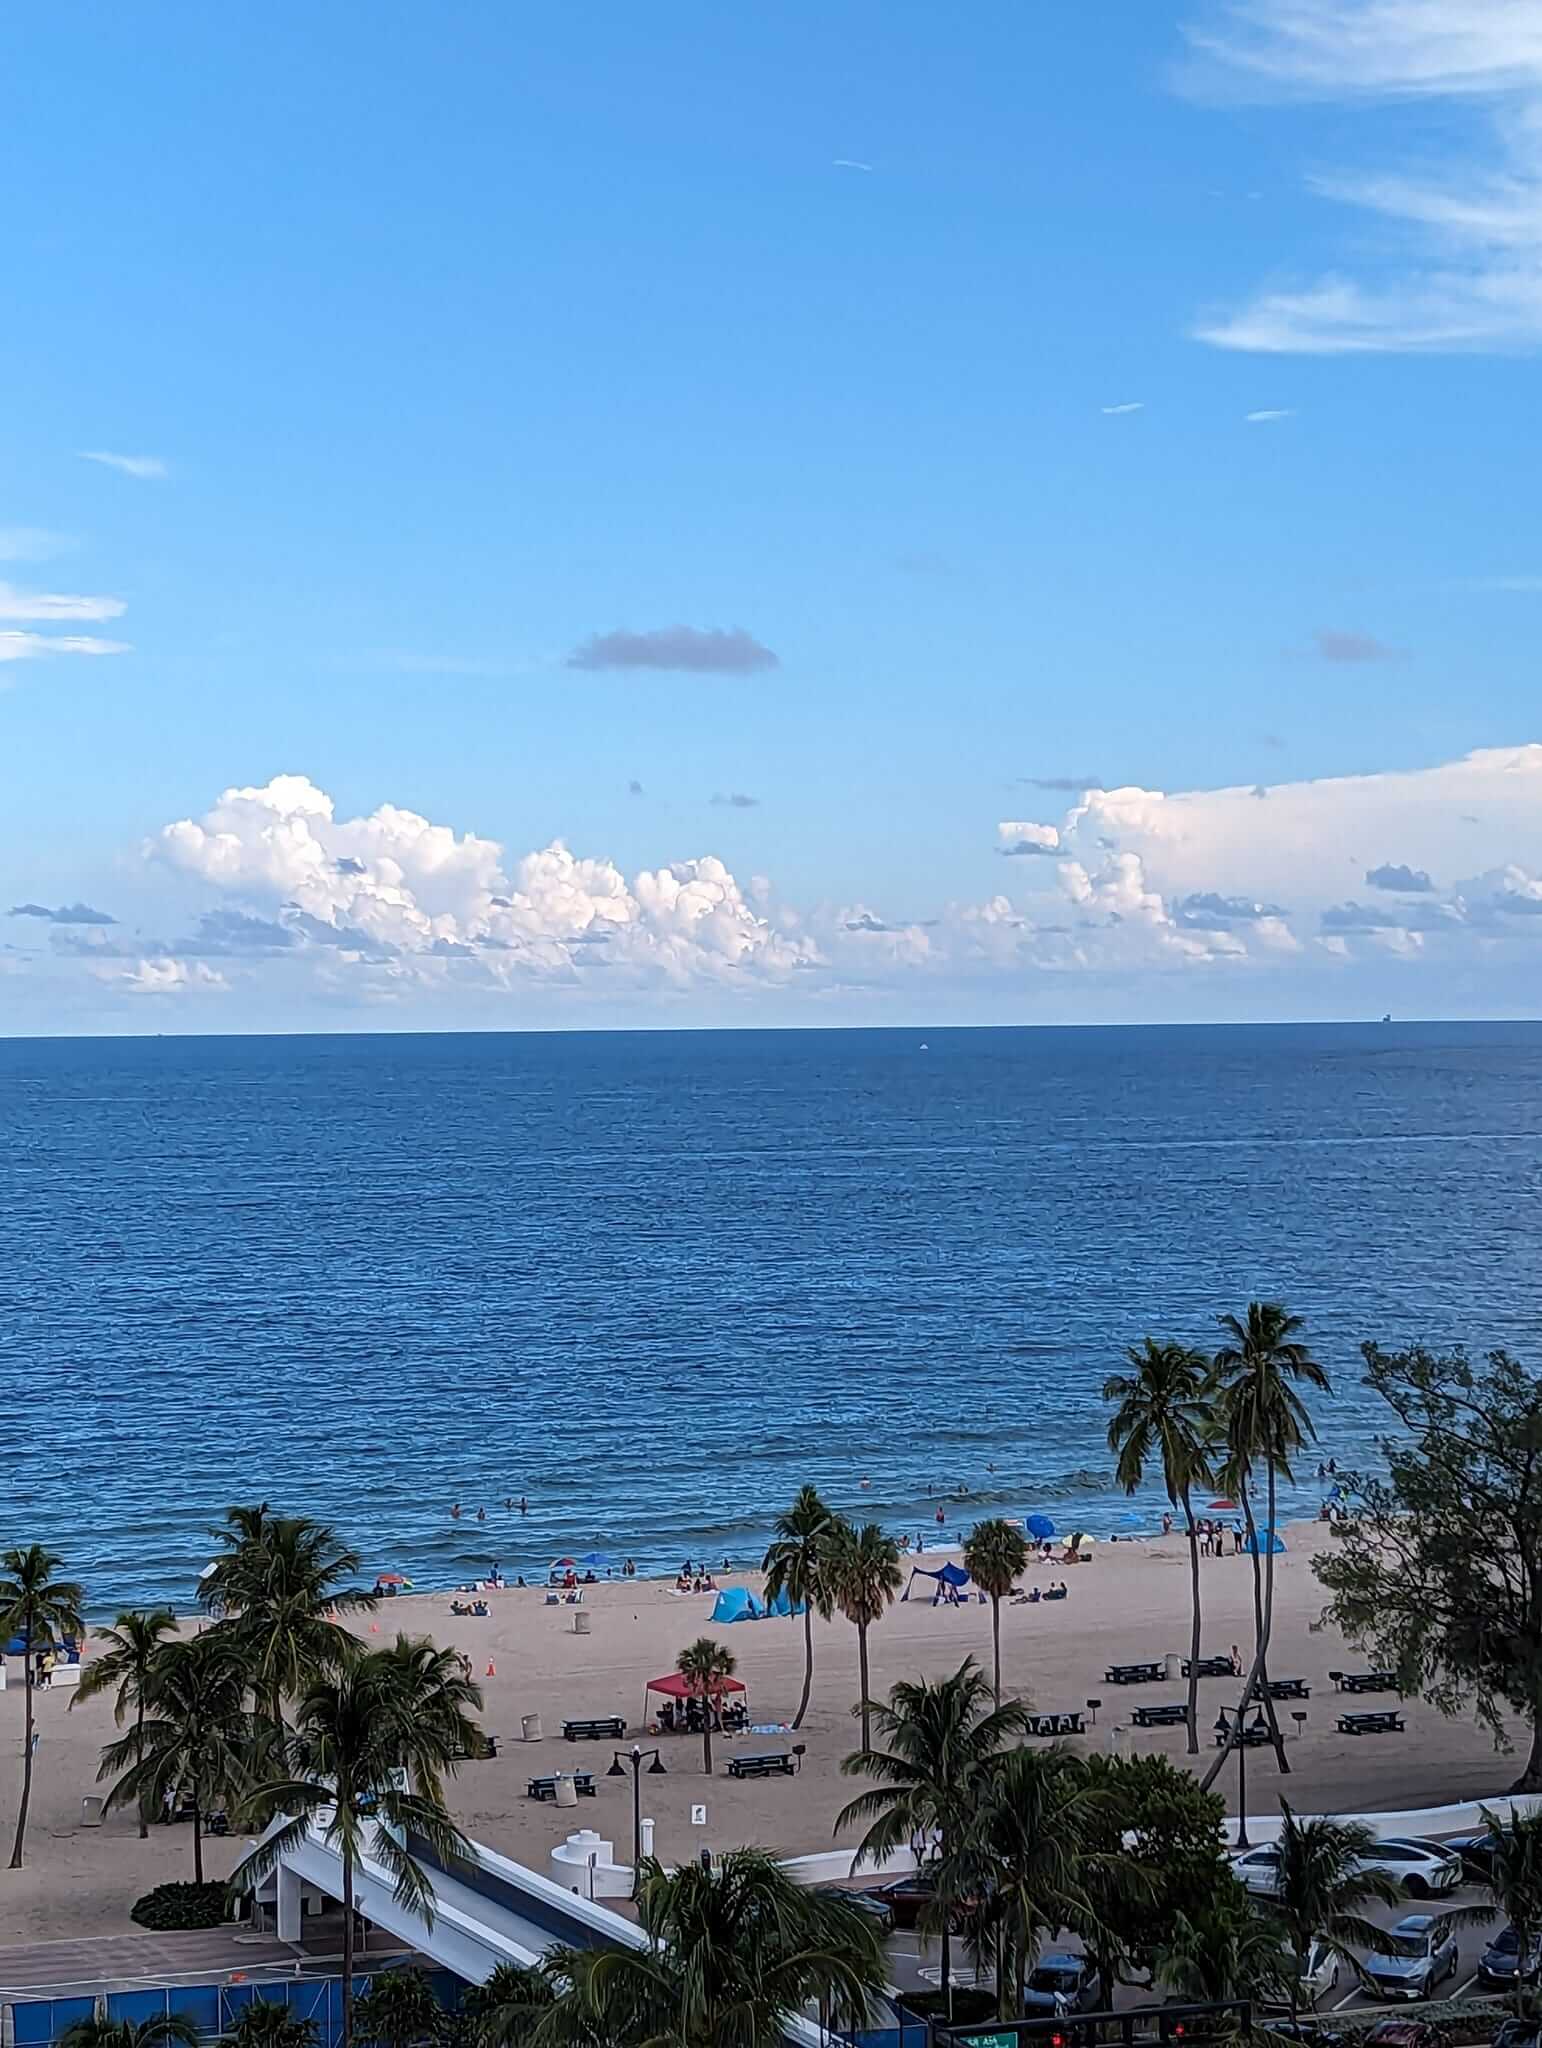 Our loyalty status with Hilton got us an upgraded room with an Ocean View at the Bahia Mar Double Tree in Fort Lauderdale, Florida.